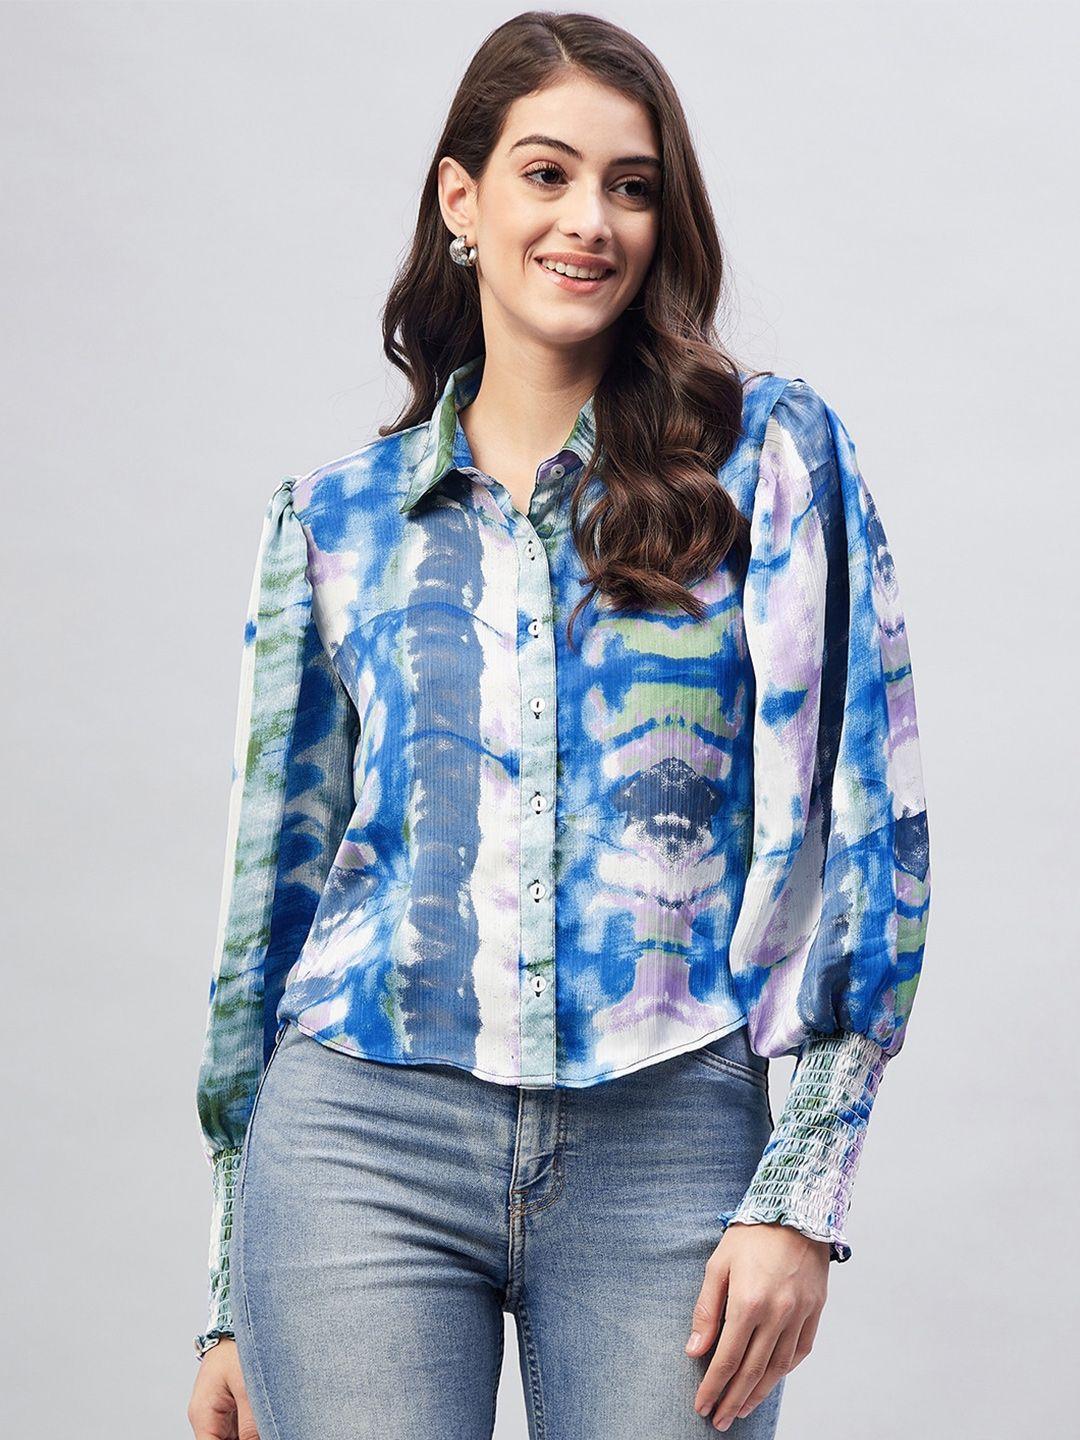 marie-claire-blue-print-shirt-style-top